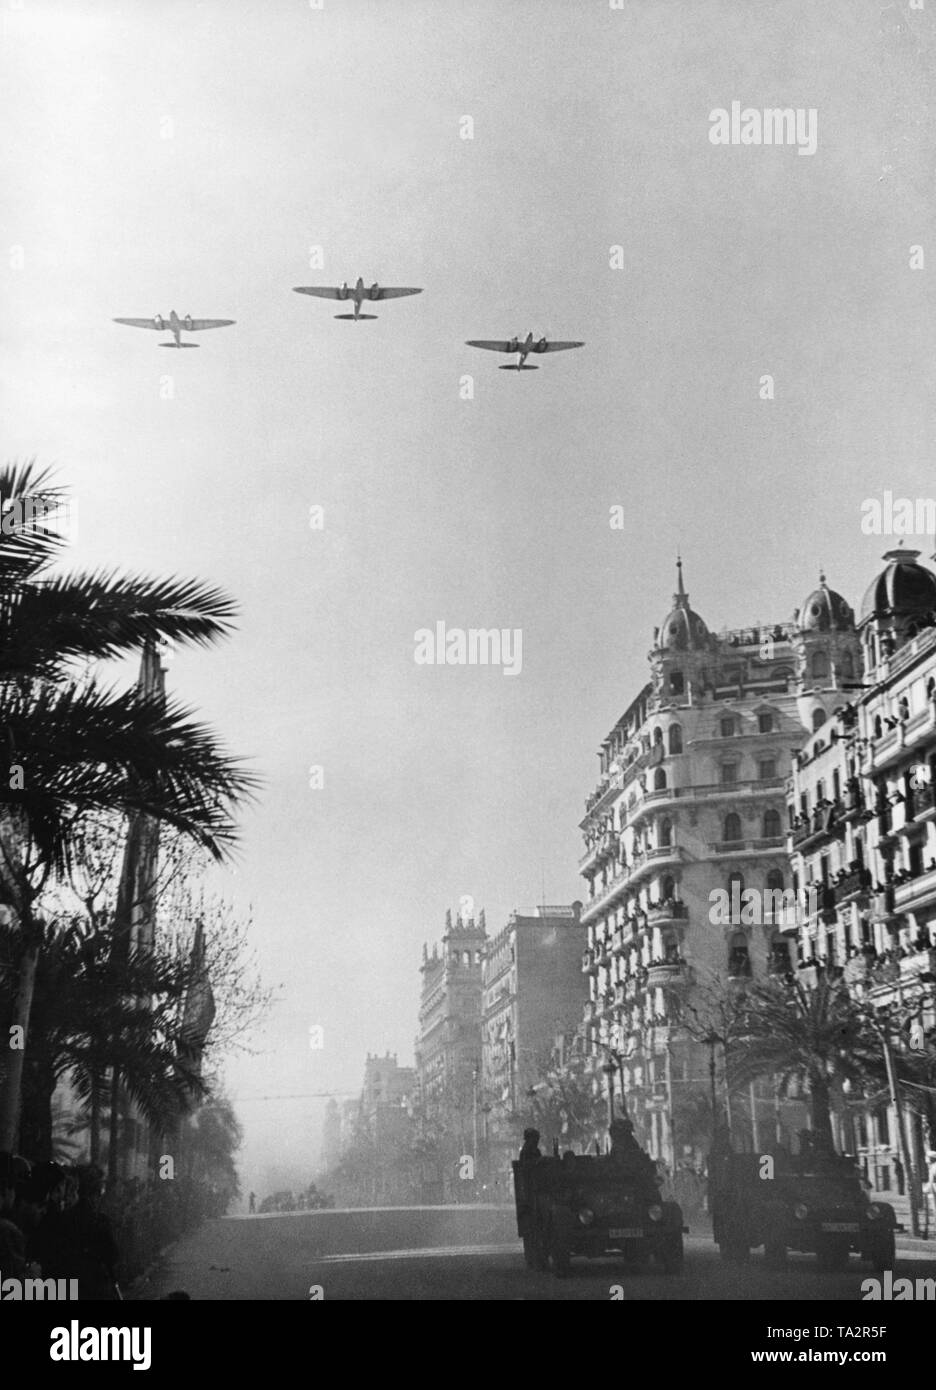 Photo of a victory parade of Spanish national units, including the Condor Legion, on Passeig De Colon after the conquest (January 1939) of Barcelona by General Francisco Franco on February 21, 1939. Two German tractors, type Krupp L2 H143, are on the road. In the sky, three Heinkel He 111 bombers in formation flight. Stock Photo